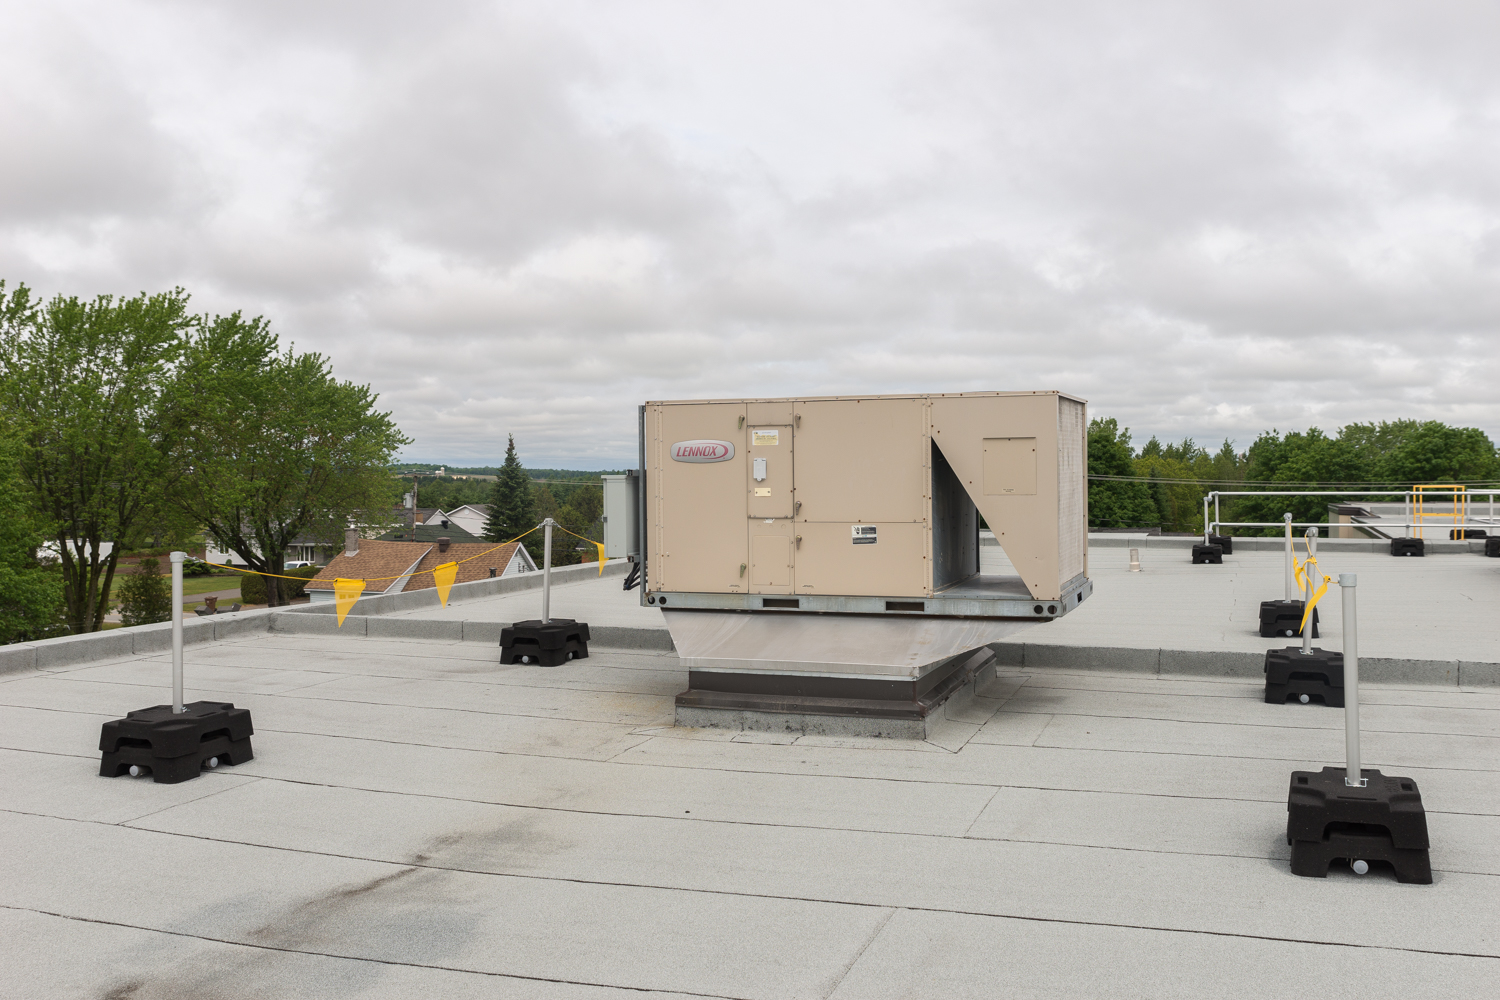 Beyond the norms: Exceptional roof fall protection for this multinational company